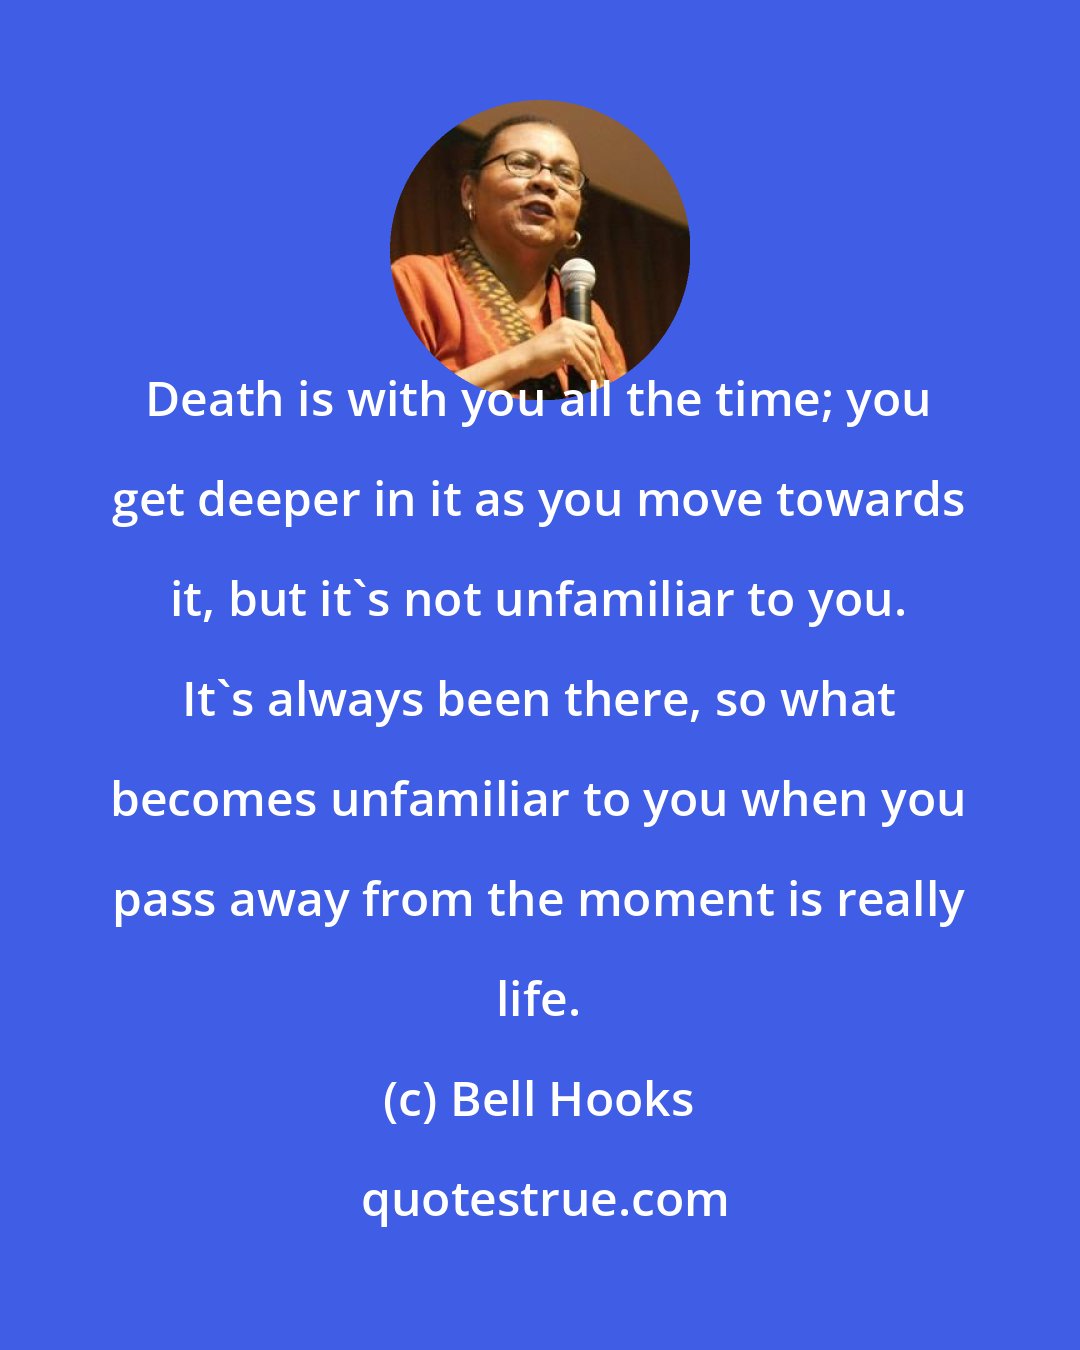 Bell Hooks: Death is with you all the time; you get deeper in it as you move towards it, but it's not unfamiliar to you. It's always been there, so what becomes unfamiliar to you when you pass away from the moment is really life.